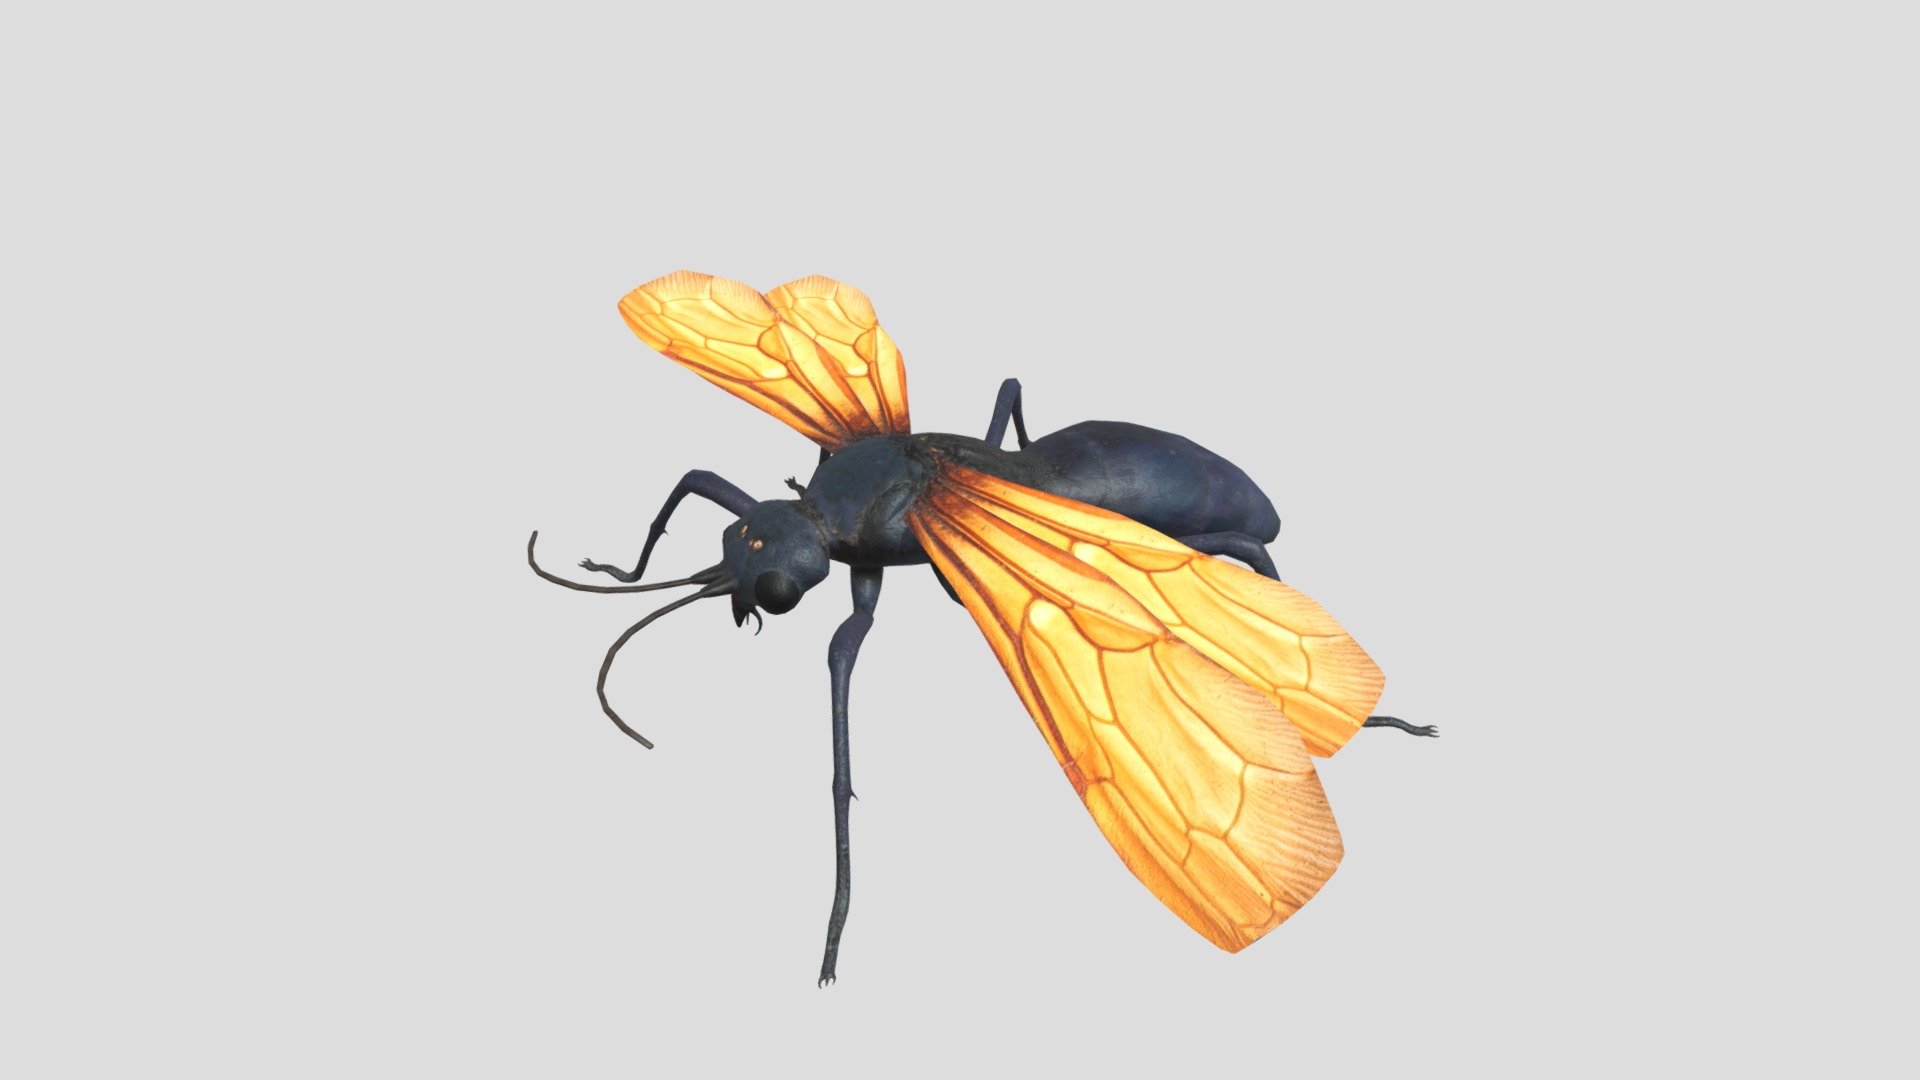 Low poly 3d model of Tarantula hawk.
A tarantula hawk is a spider wasp (Pompilidae) that hunts tarantulas.

Product includes:
3d file - one mesh object
Textures-Color,Normal and Specular maps.
Textures size-4096x4096 pxls JPEGs 3d model